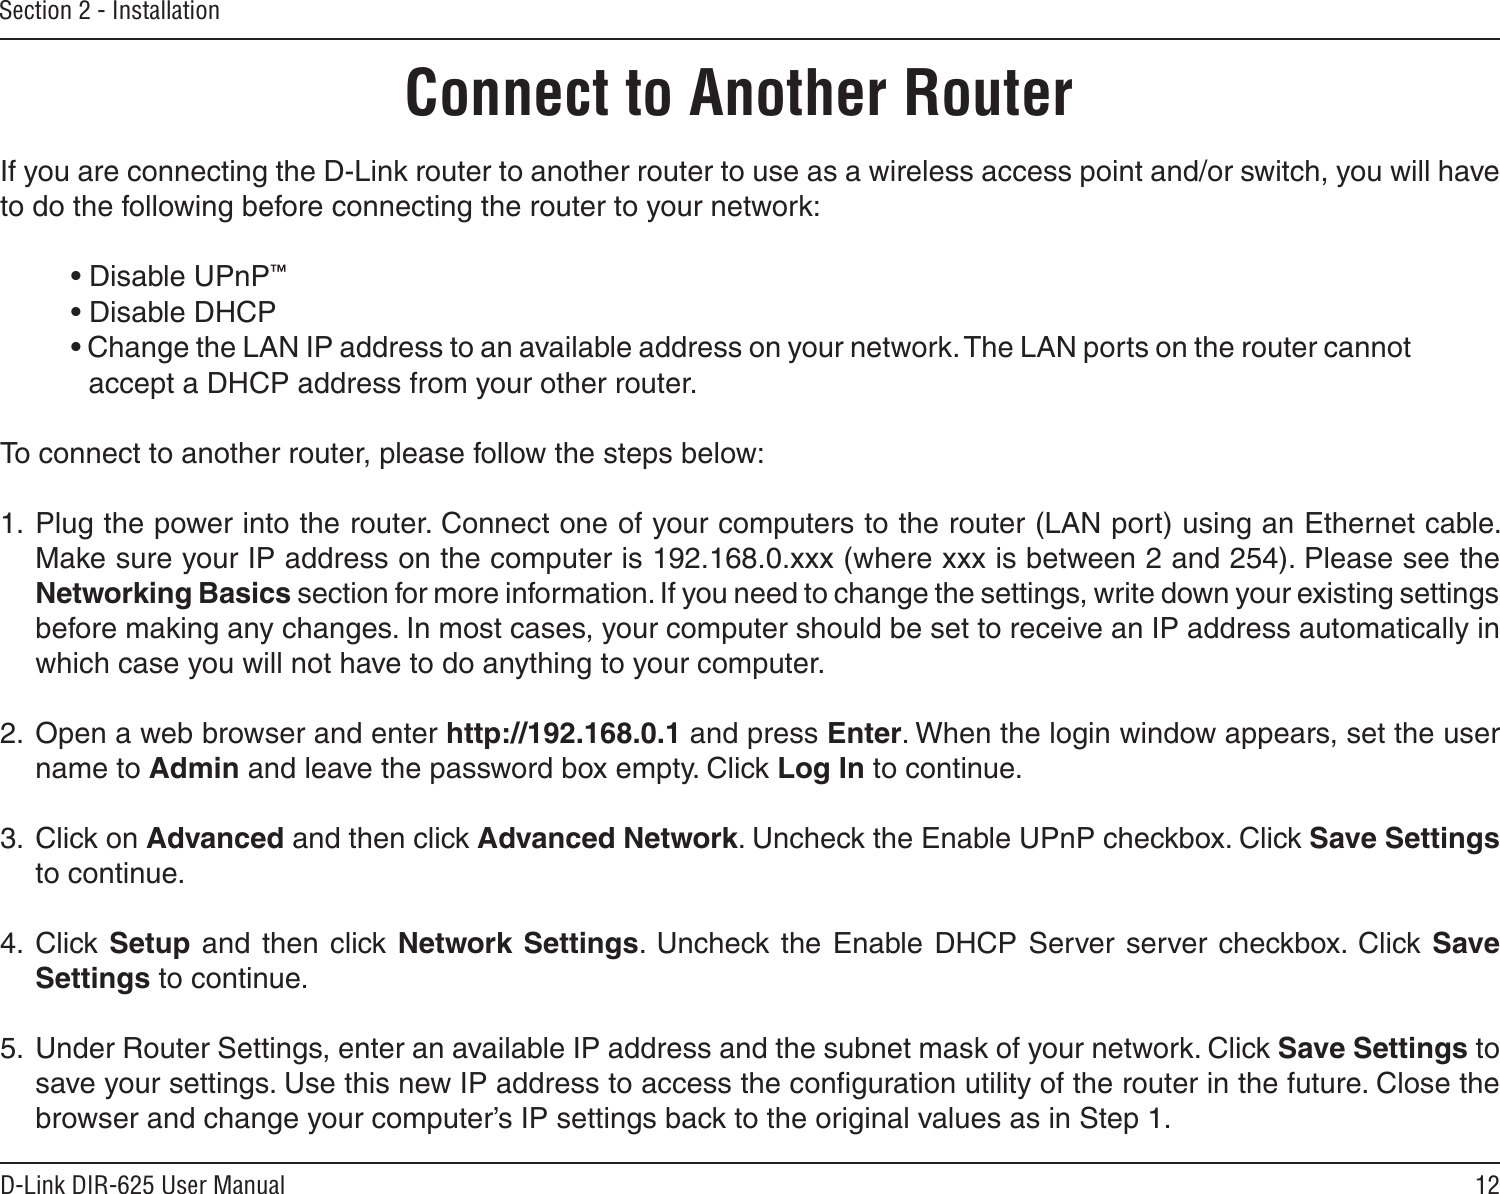 12D-Link DIR-625 User ManualSection 2 - InstallationIf you are connecting the D-Link router to another router to use as a wireless access point and/or switch, you will have to do the following before connecting the router to your network:• Disable UPnP™• Disable DHCP• Change the LAN IP address to an available address on your network. The LAN ports on the router cannot accept a DHCP address from your other router.To connect to another router, please follow the steps below:1.  Plug the power into the router. Connect one of your computers to the router (LAN port) using an Ethernet cable. Make sure your IP address on the computer is 192.168.0.xxx (where xxx is between 2 and 254). Please see the Networking Basics section for more information. If you need to change the settings, write down your existing settings before making any changes. In most cases, your computer should be set to receive an IP address automatically in which case you will not have to do anything to your computer.2.  Open a web browser and enter http://192.168.0.1 and press Enter. When the login window appears, set the user name to Admin and leave the password box empty. Click Log In to continue.3.  Click on Advanced and then click Advanced Network. Uncheck the Enable UPnP checkbox. Click Save Settings to continue. 4.  Click  Setup  and  then  click Network  Settings.  Uncheck the Enable  DHCP  Server server checkbox.  Click Save Settings to continue.5.  Under Router Settings, enter an available IP address and the subnet mask of your network. Click Save Settings to save your settings. Use this new IP address to access the conﬁguration utility of the router in the future. Close the browser and change your computer’s IP settings back to the original values as in Step 1.Connect to Another Router